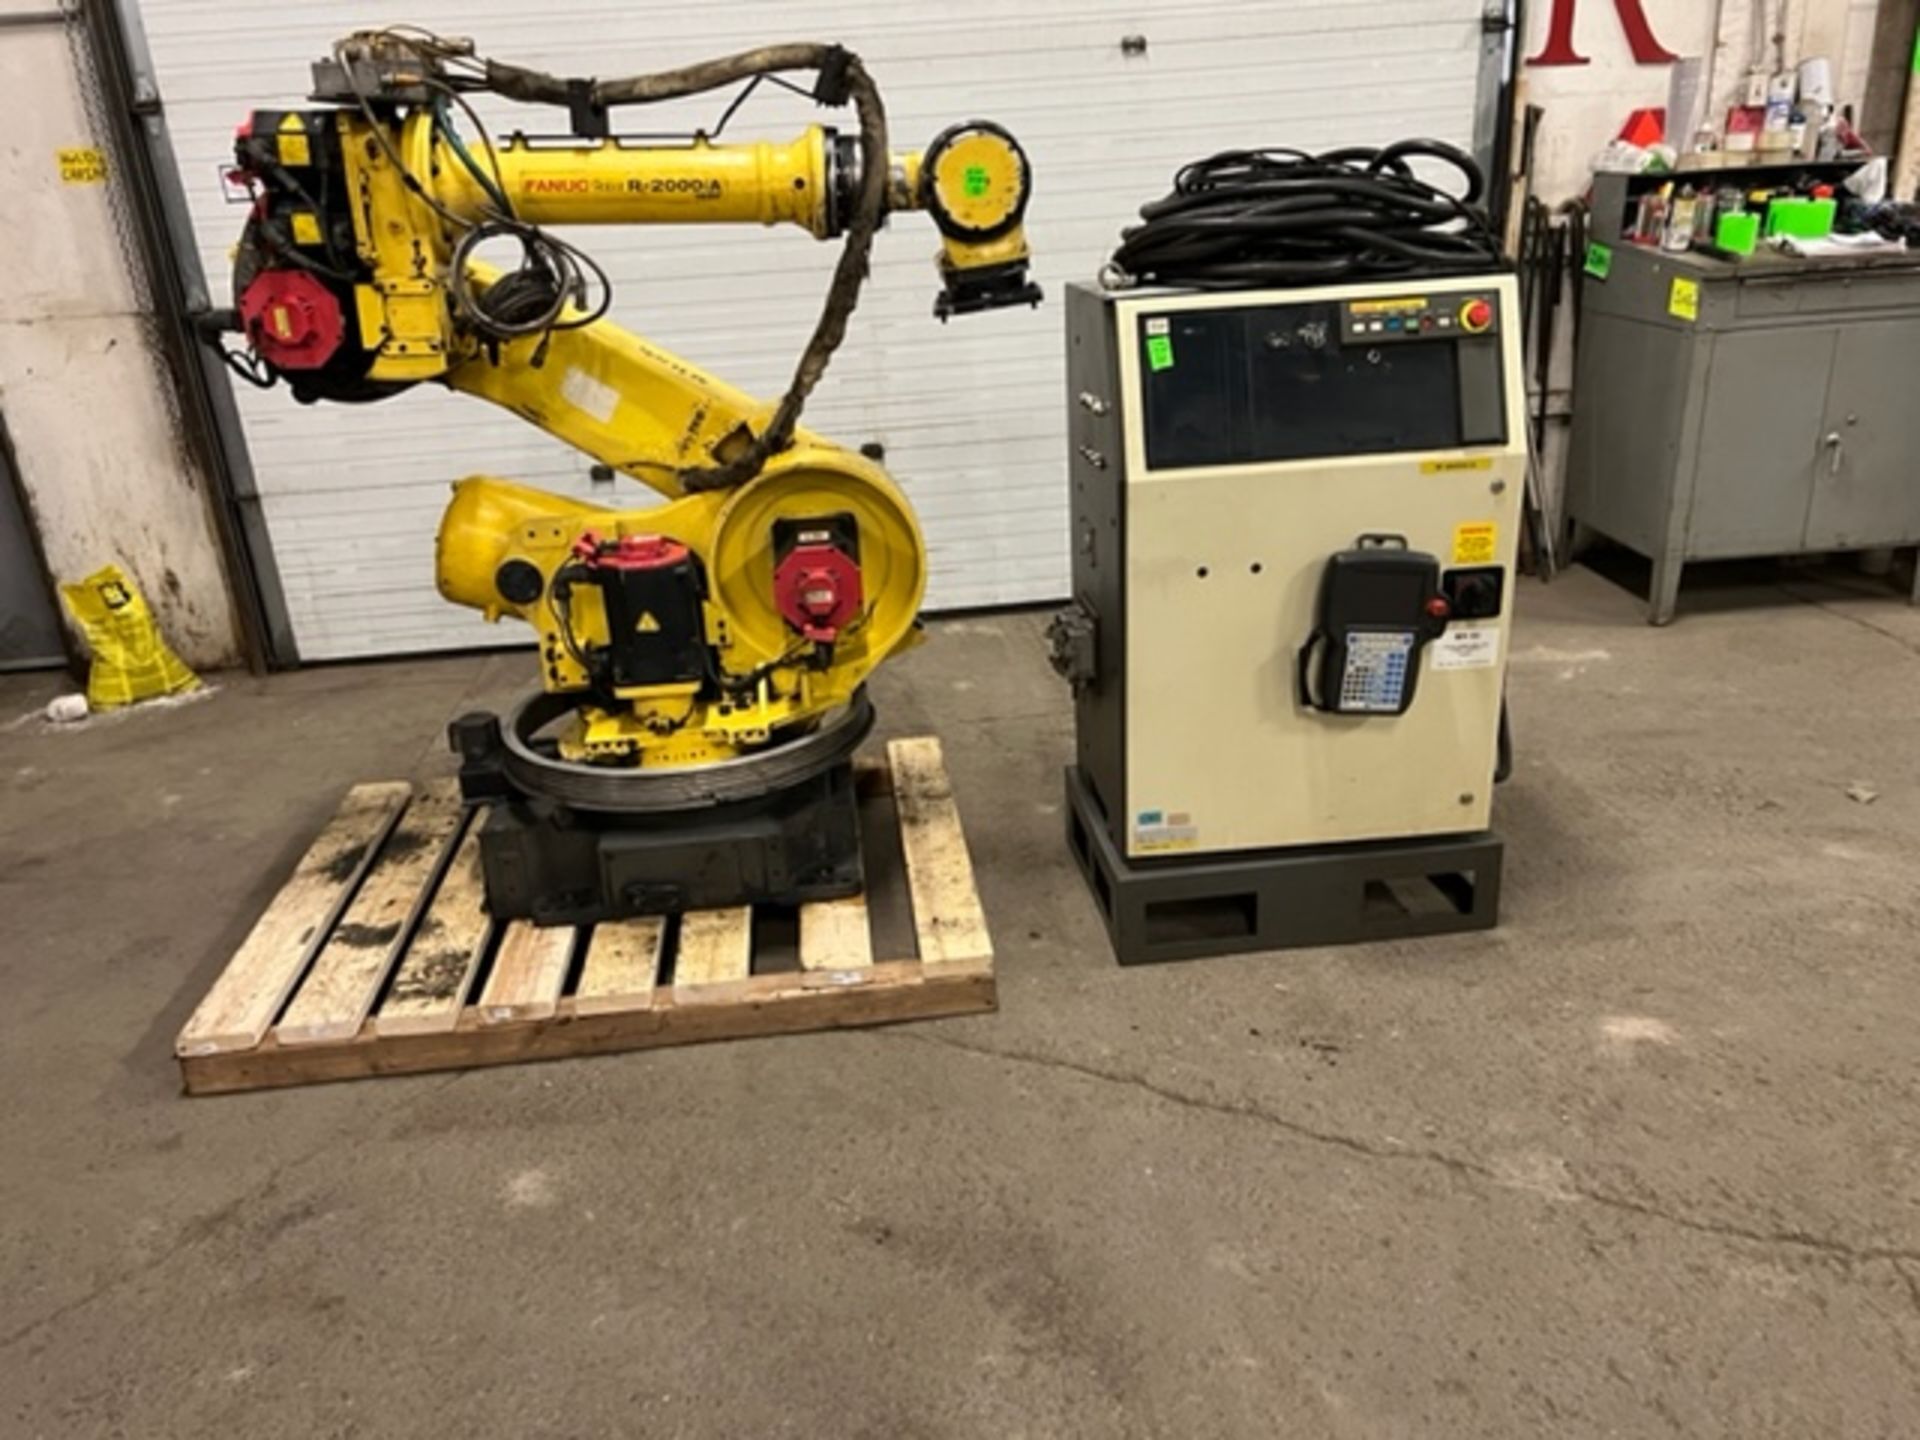 MINT Fanuc Handling Robot Model R-2000iA 165F - 165kg payload with R-J3iB Controller and pendant